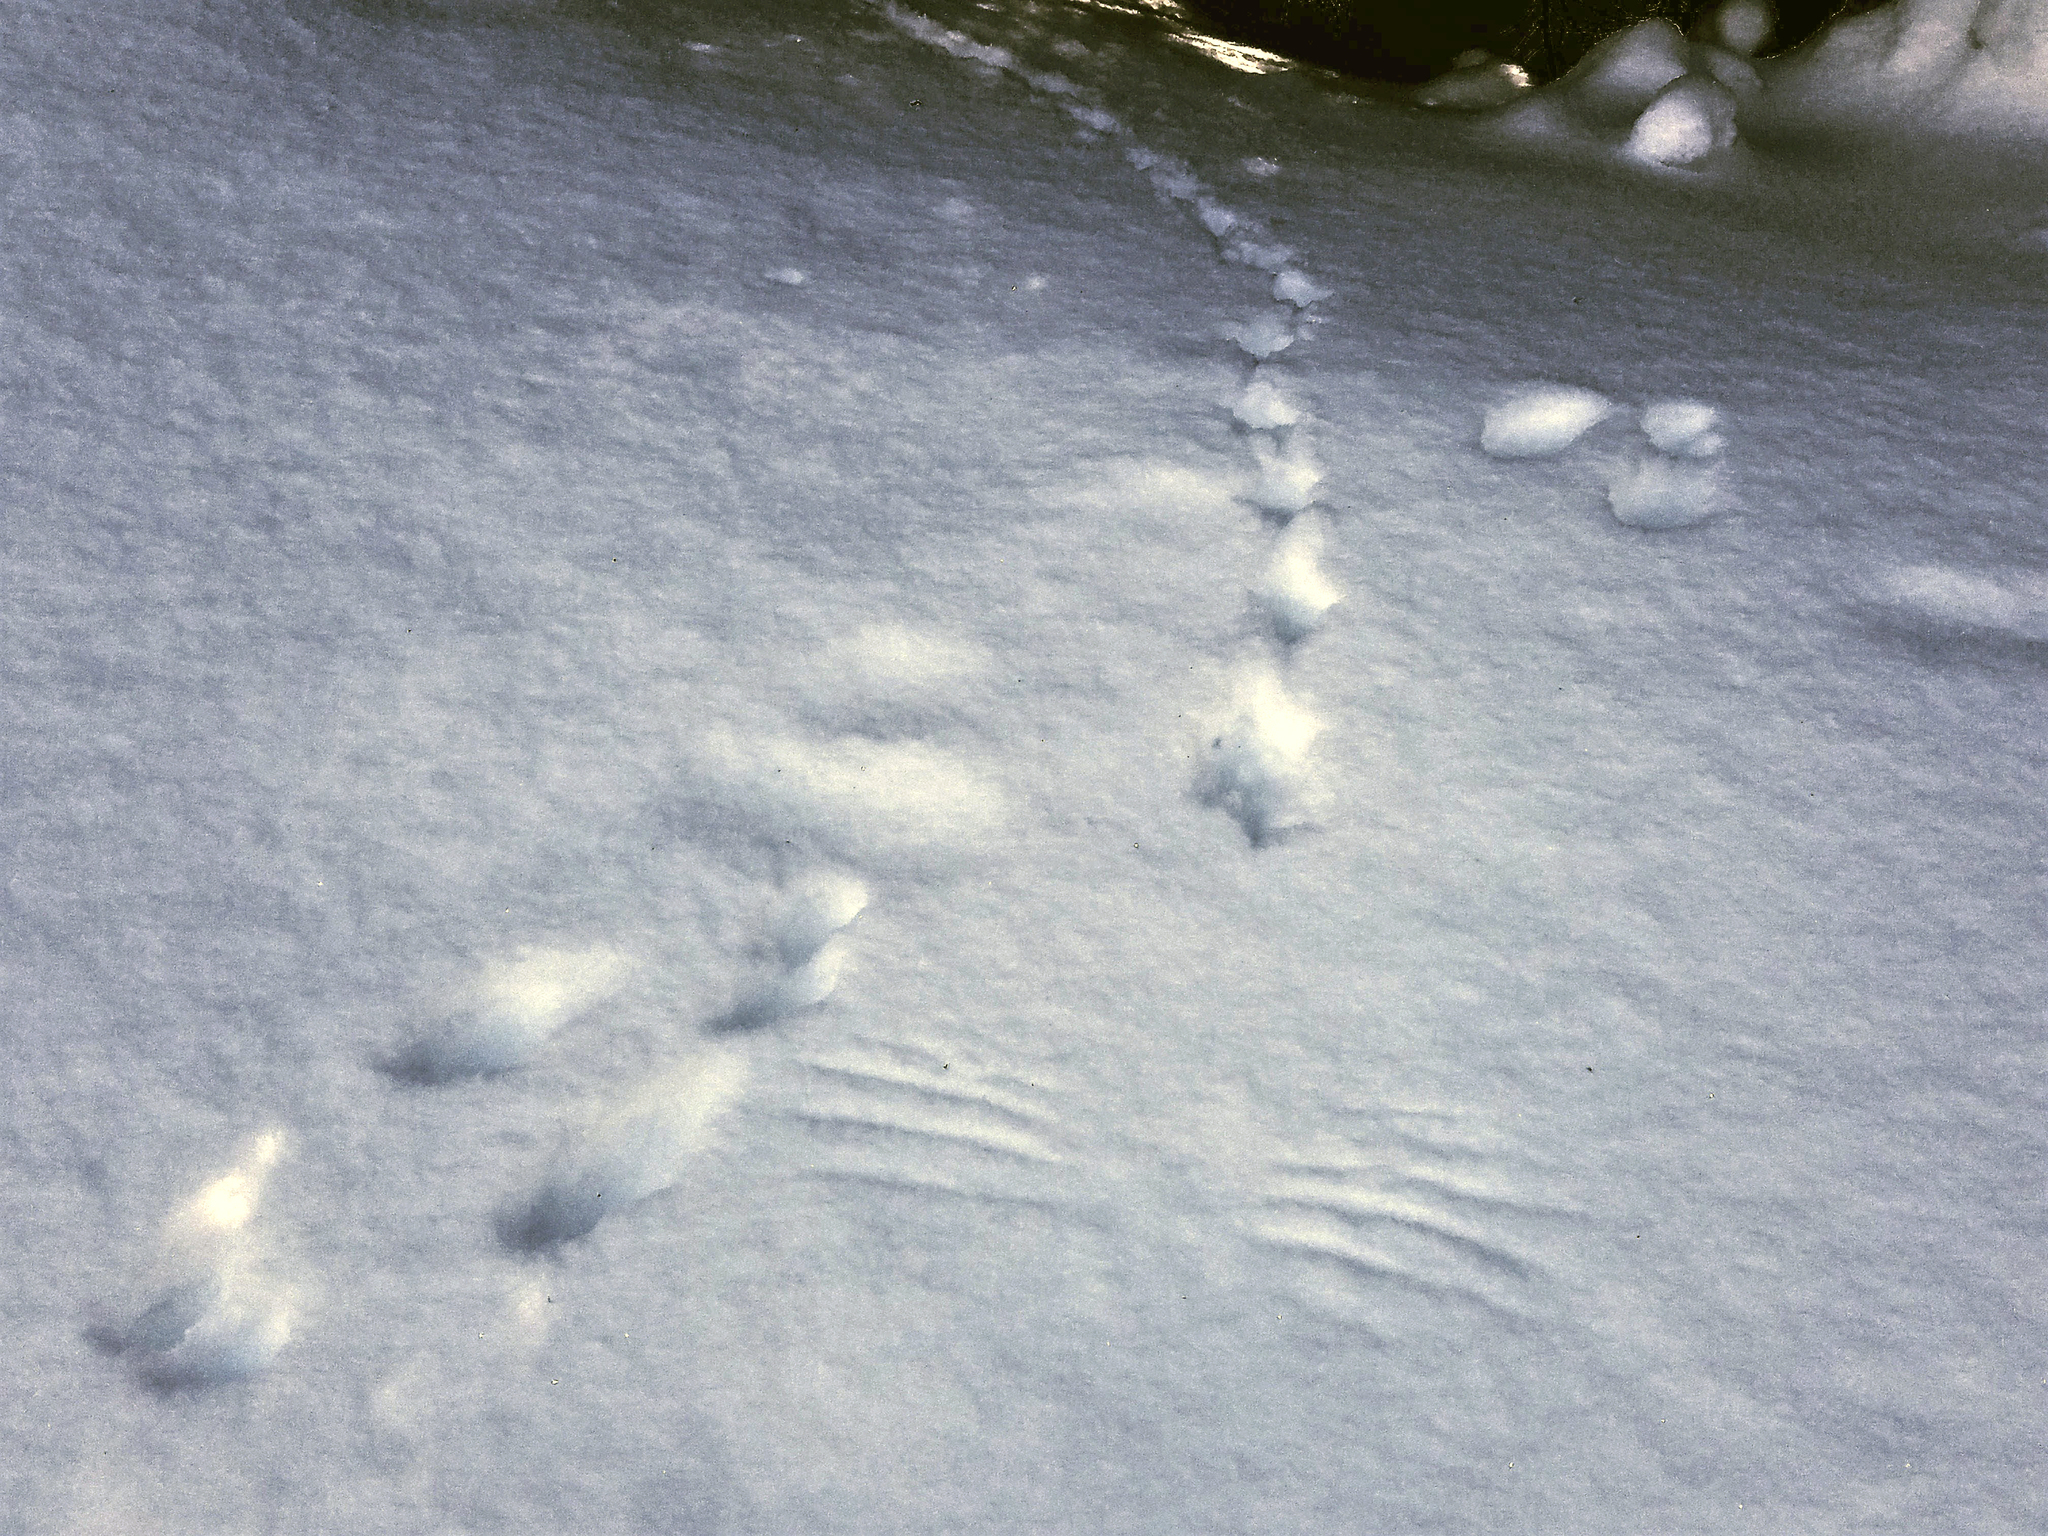 In this Jan. 22, 2017, photo a mountain grouse track crosses a snowshoe hare track at Mount Spokane State Park in Washington. (Rich Landers/The Spokesman-Review via AP)